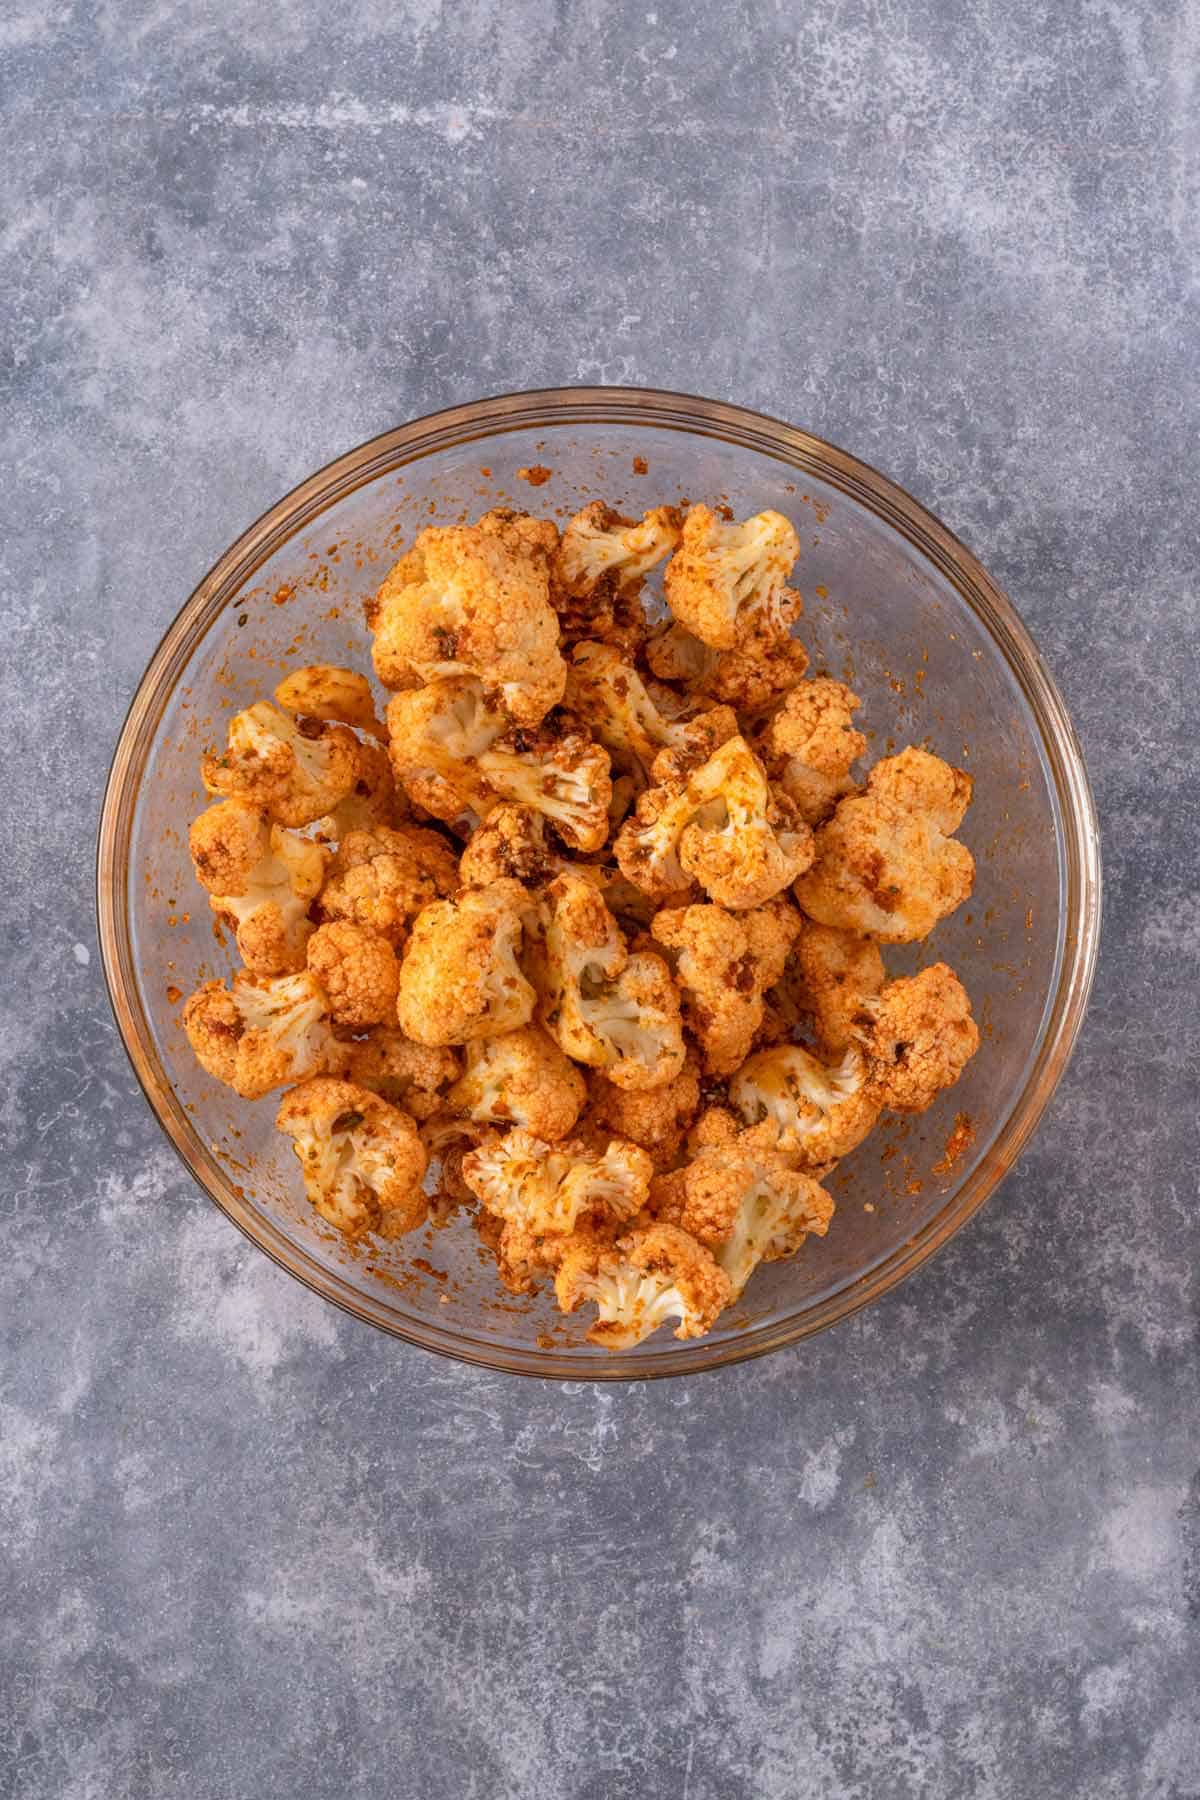 cauliflower bites in a bowl mixed with seasonings